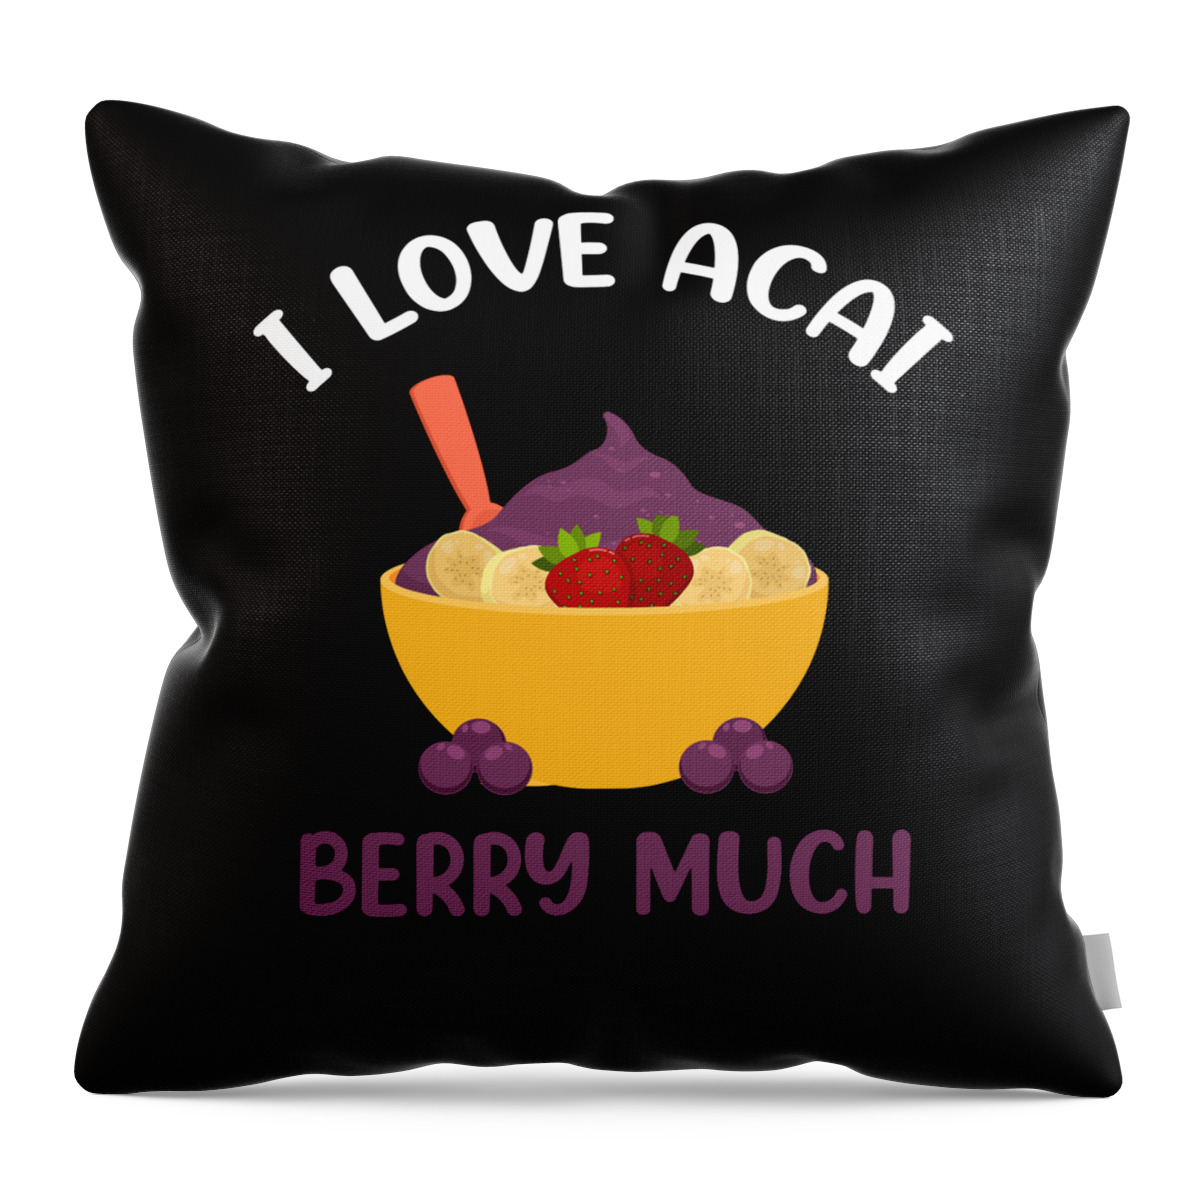 Acai Bowl Throw Pillow featuring the digital art Berry Much Pun Healthy Brazilian Smoothie Acai Bowl product by Jacob Hughes